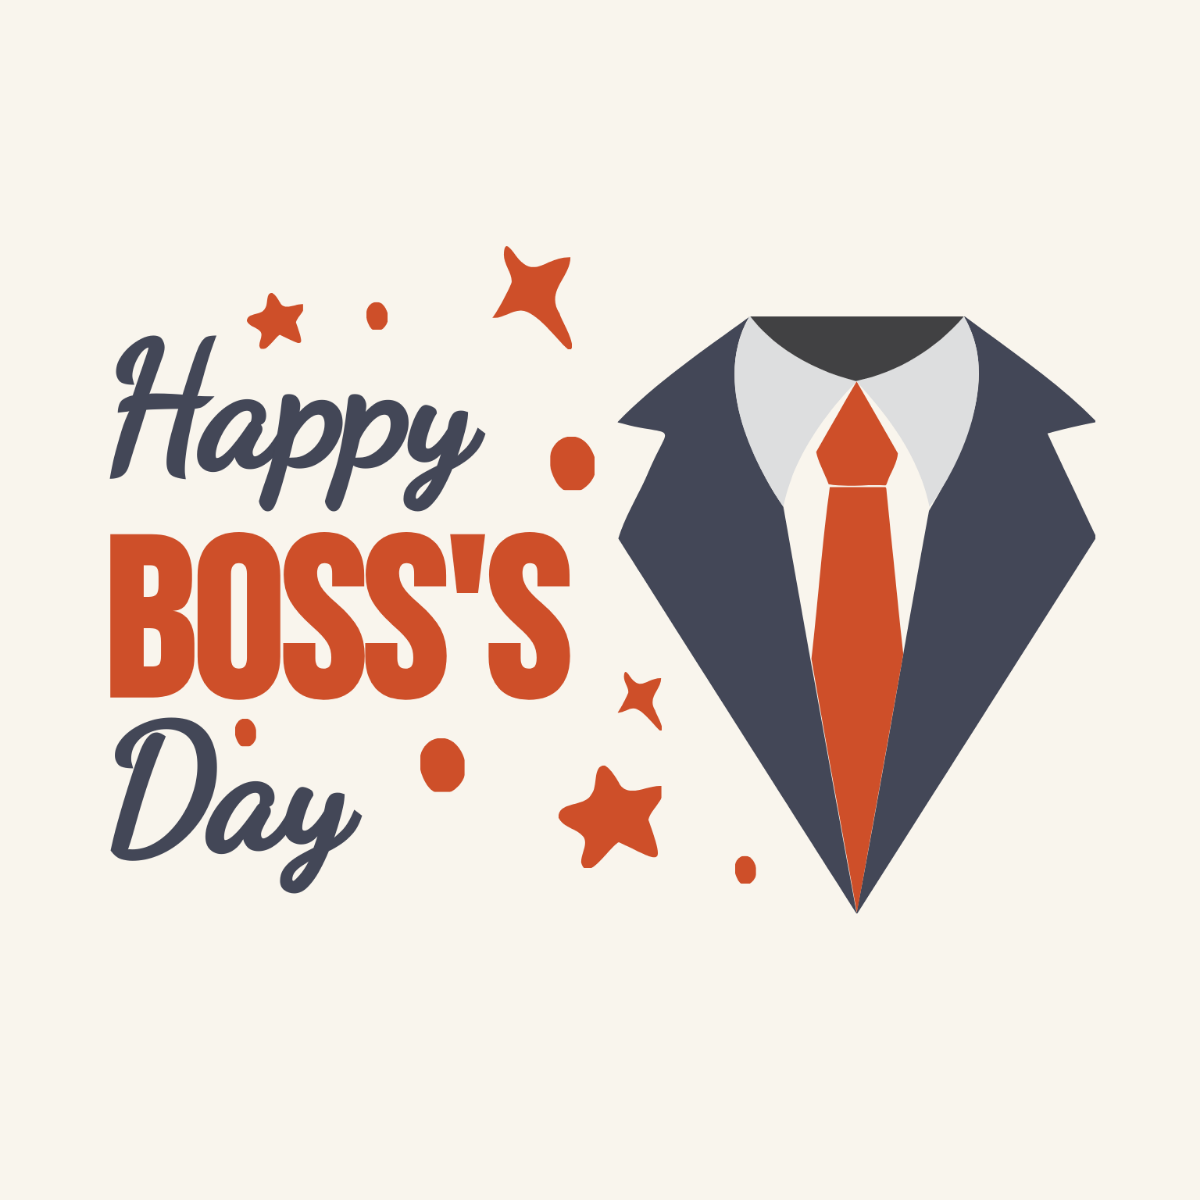 Free Happy Boss' Day Illustration Template